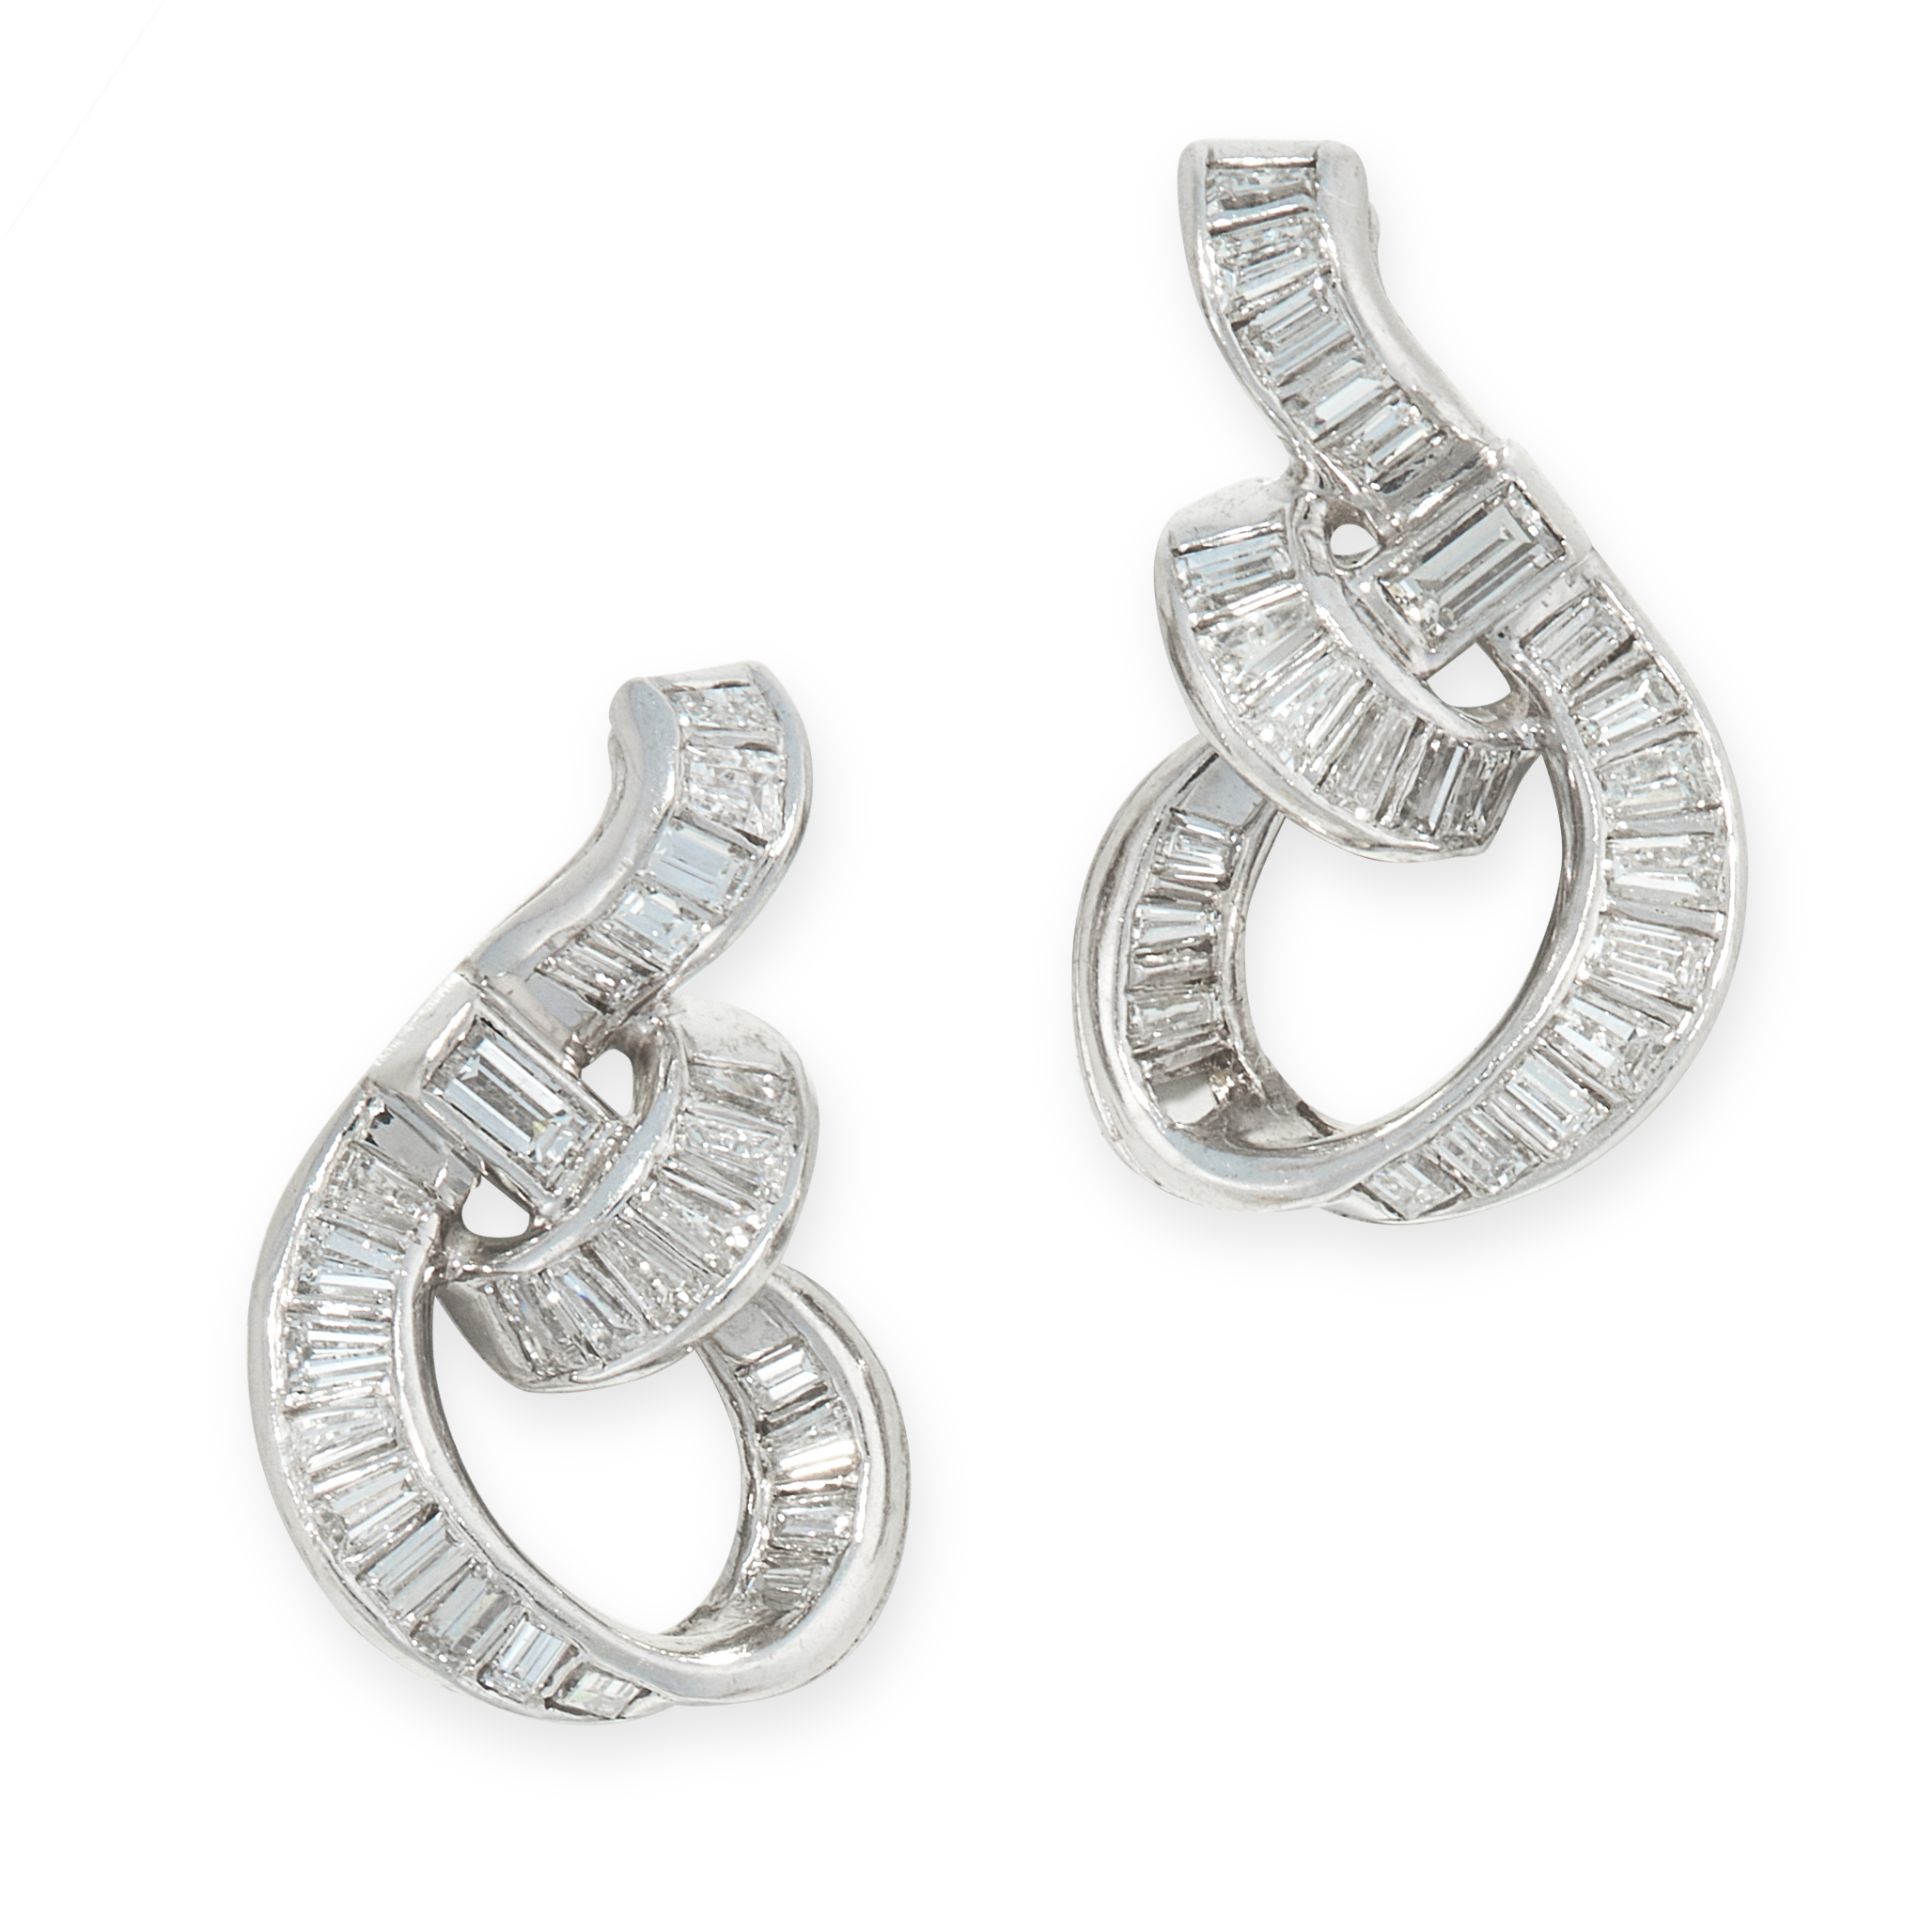 PAIR OF DIAMOND EAR CLIPS each of ribbon scroll design, set with baguette diamonds, clip fittings,